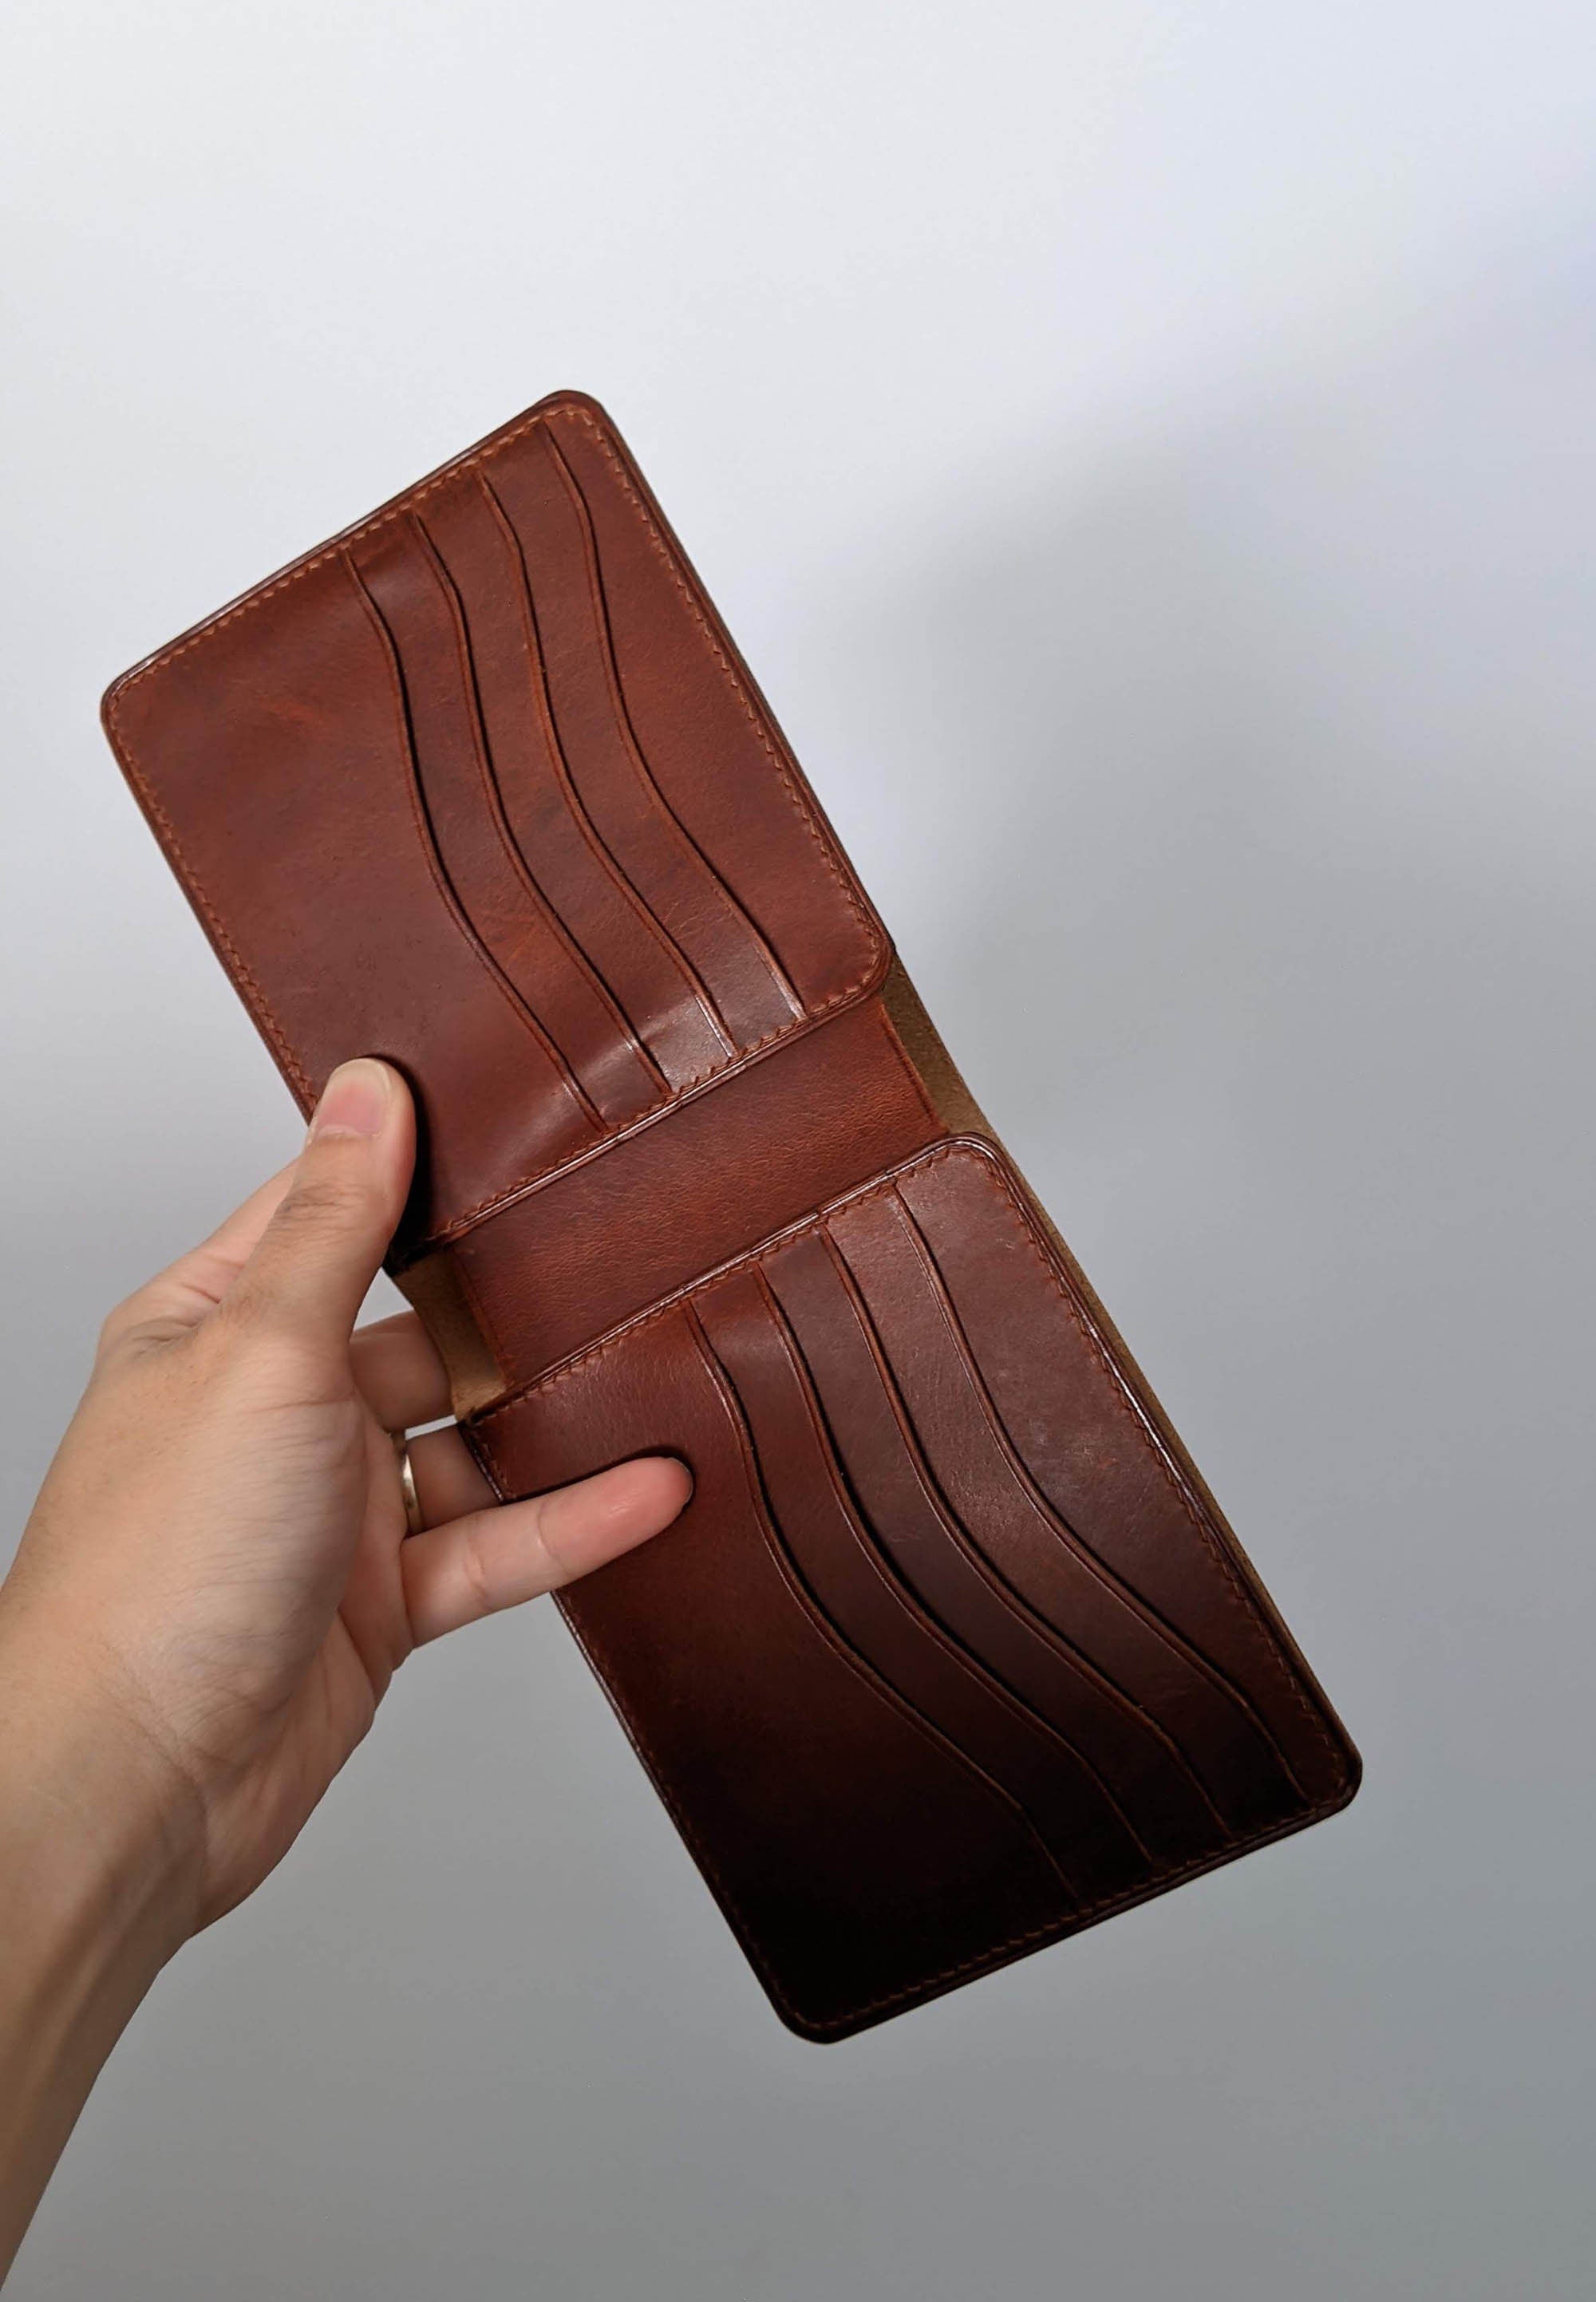 Handmade Brown Leather 8 Card Slot Bifold, Handcrafted EDC Bifold Wallet Italian Vegetable Tanned Dollaro, Wax Pull up, Made in Spain